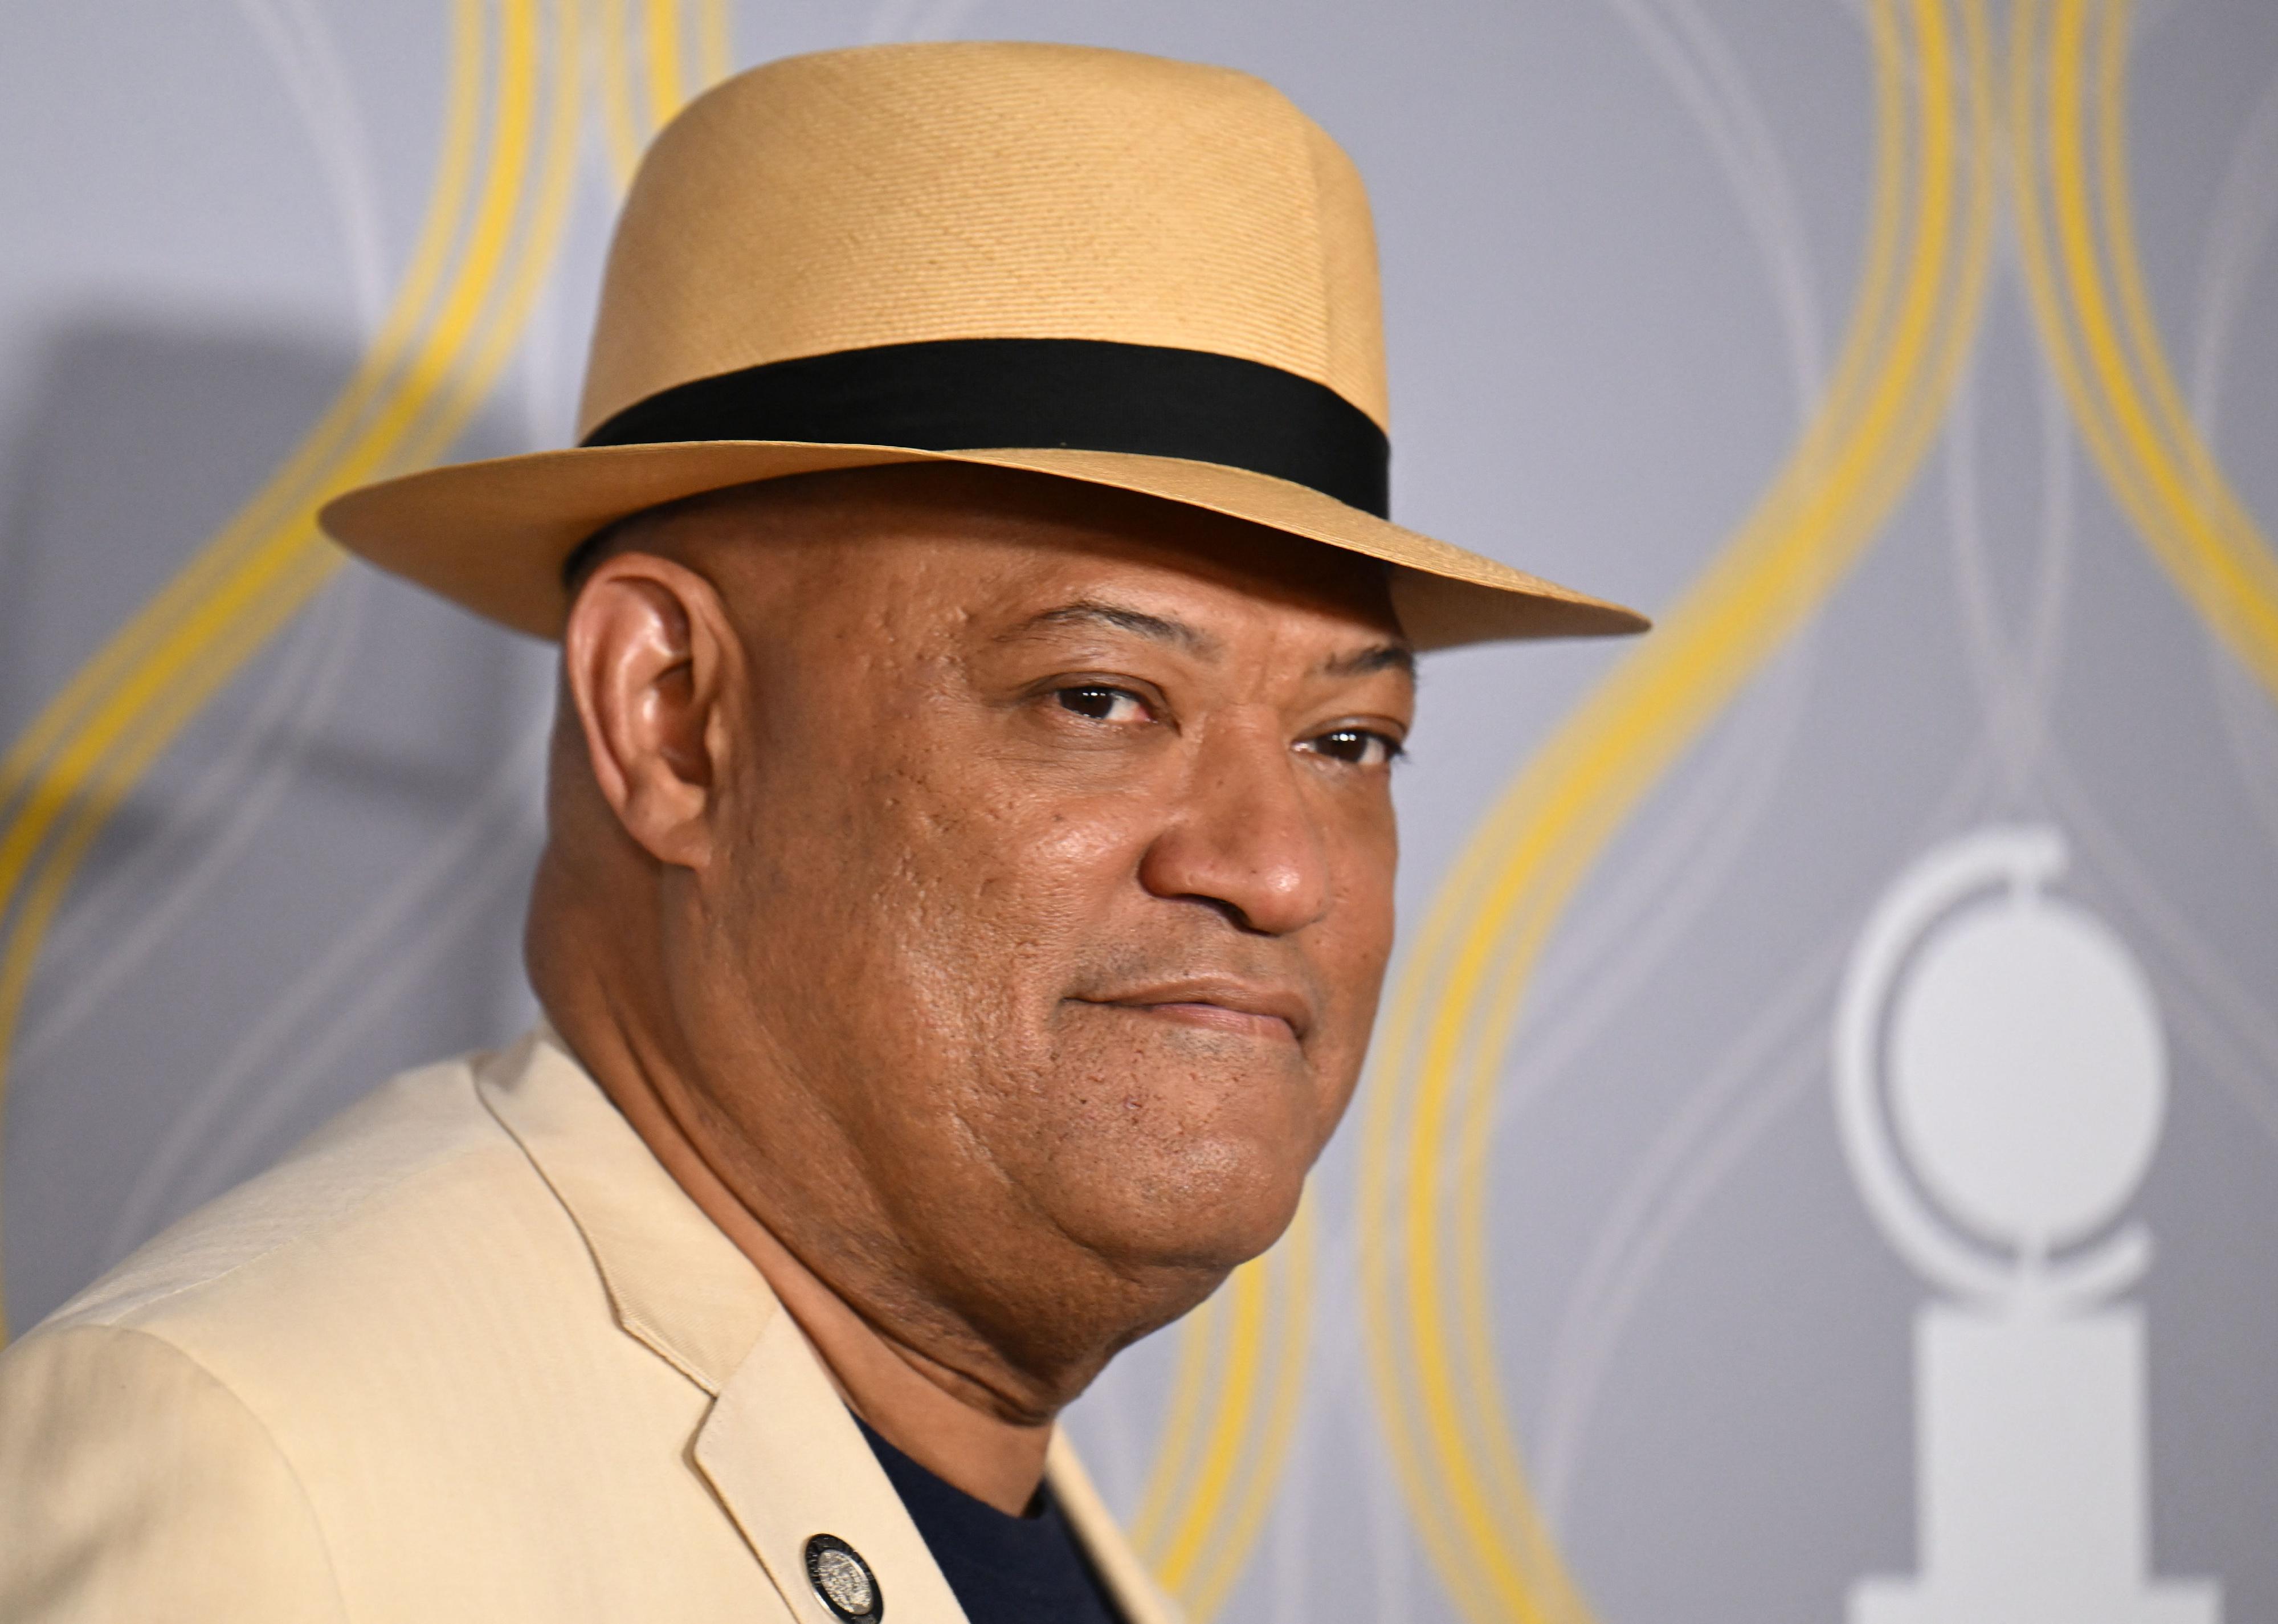 Laurence Fishburne in a tan suit and hat.